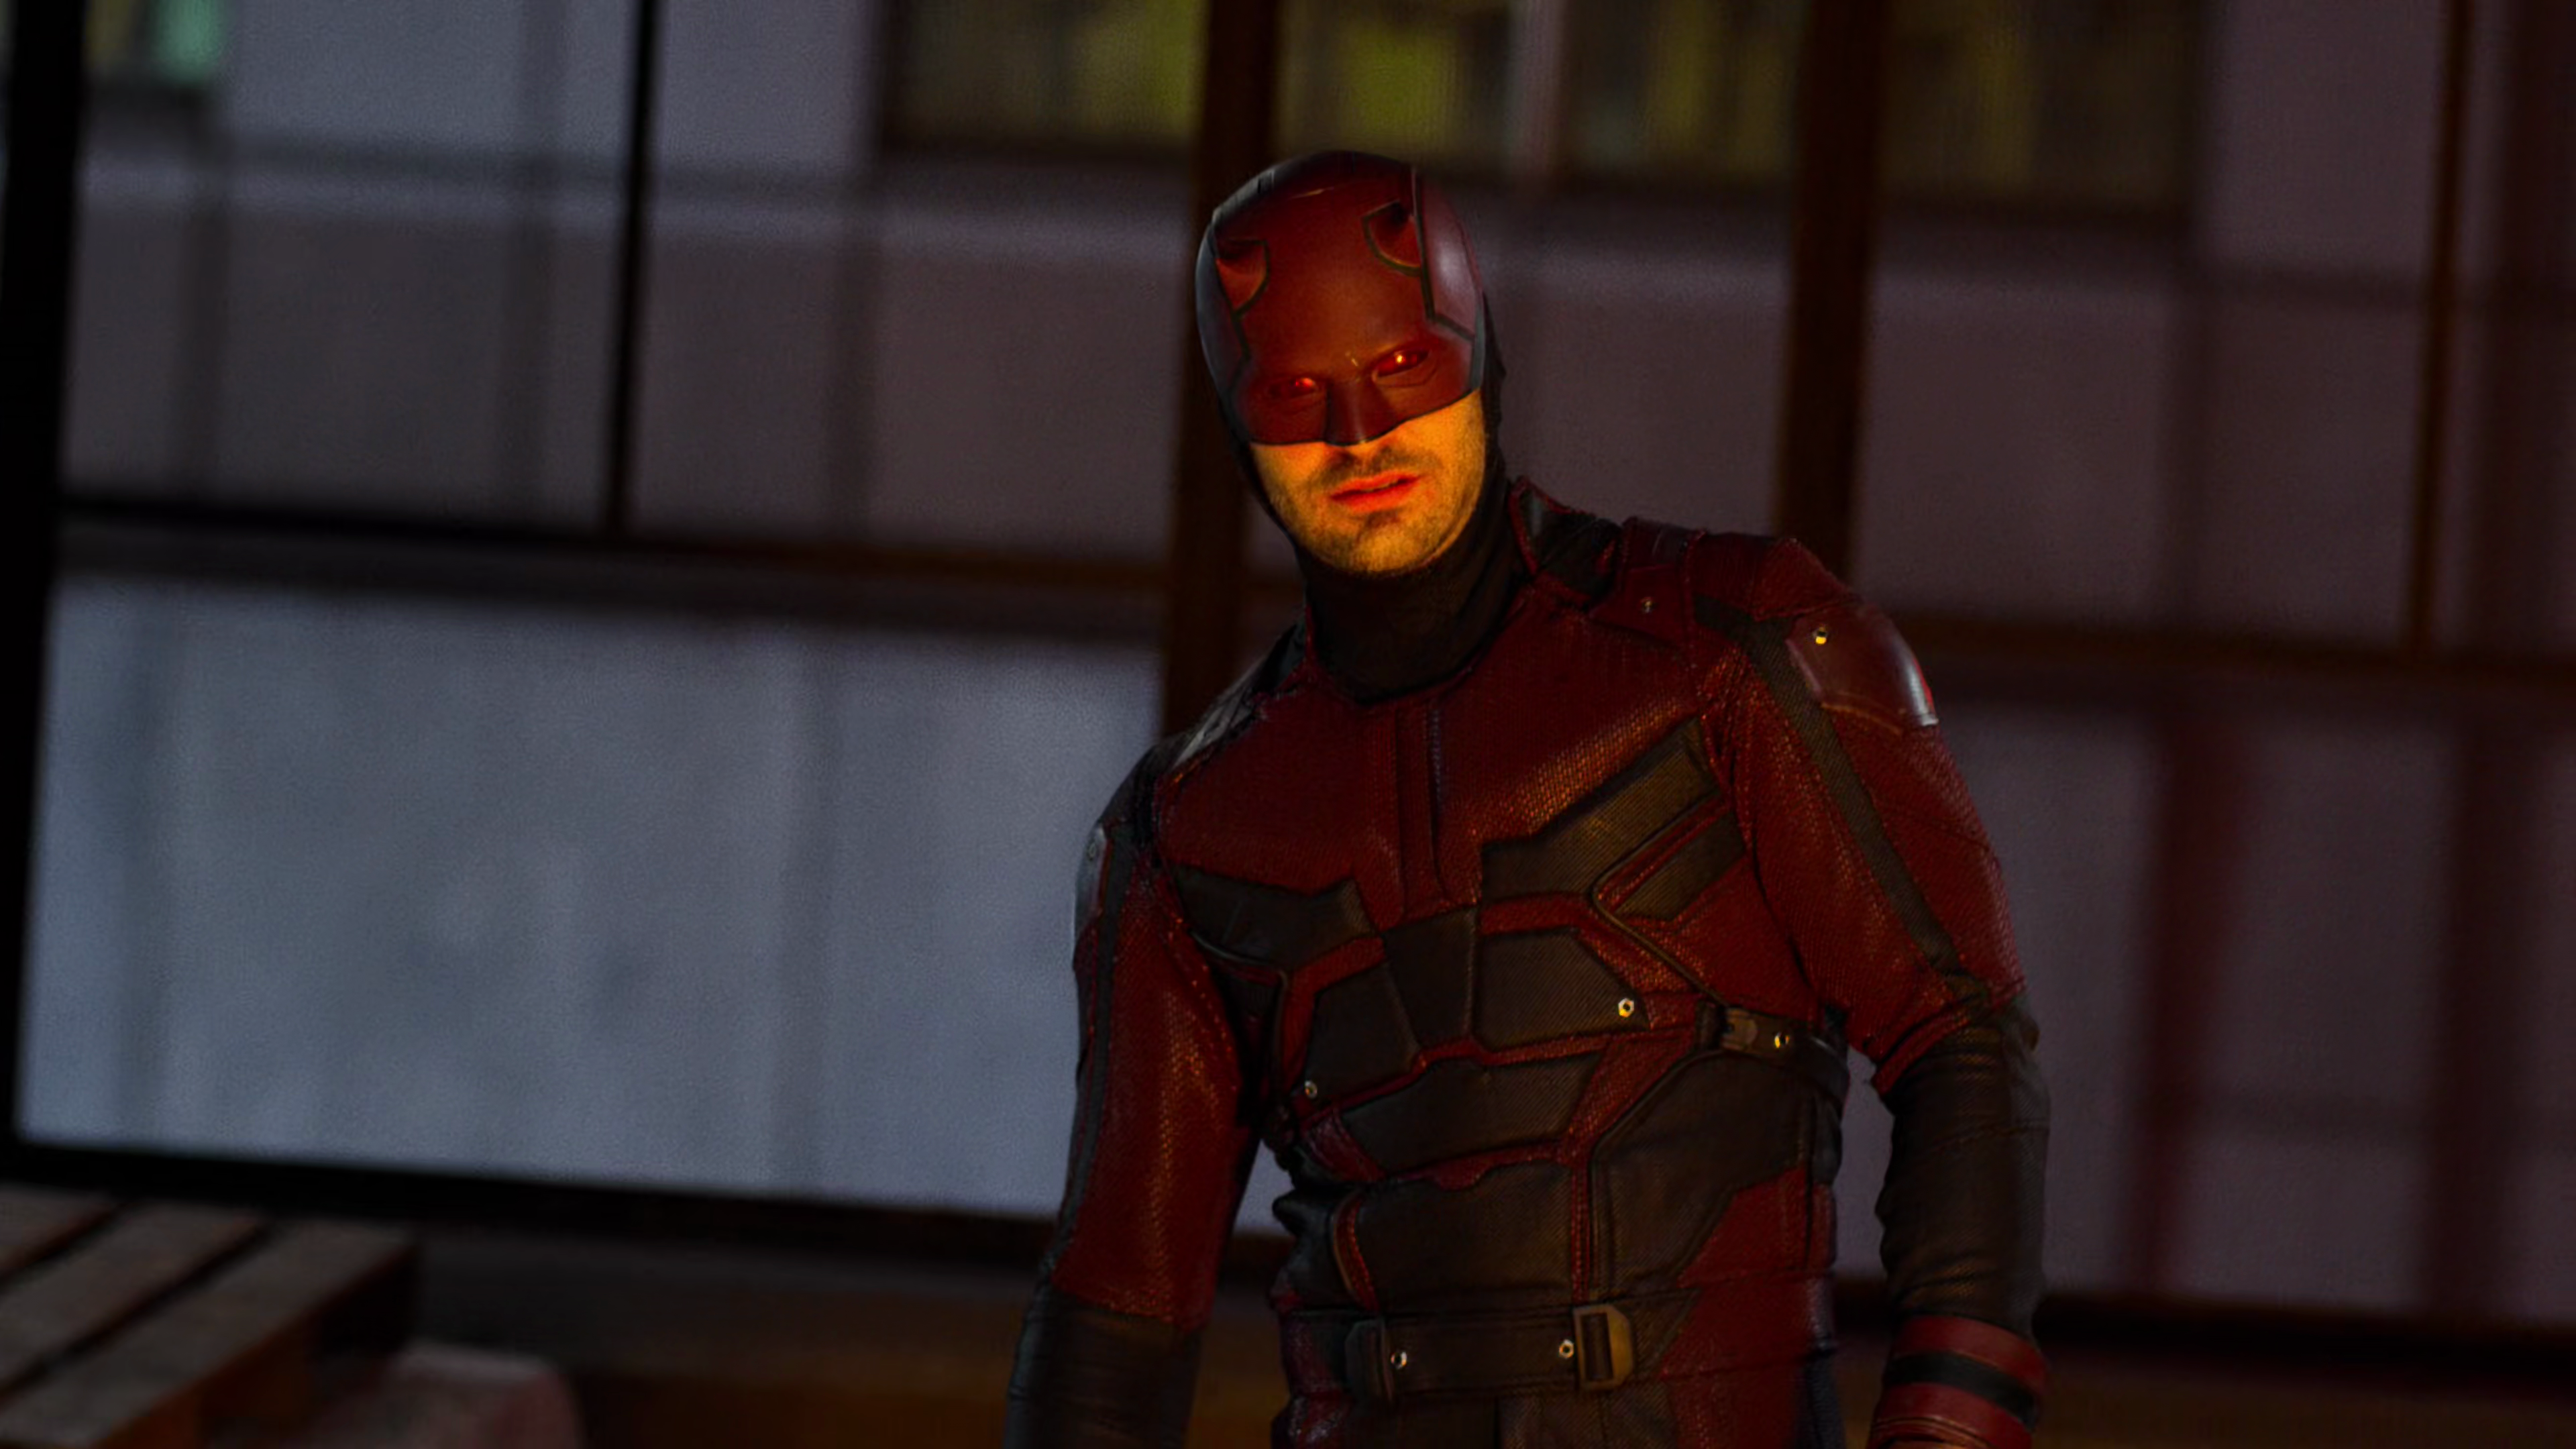 Daredevil (Charlie Cox) looks on as The Hand bursts a gas pipe in The Defenders Season 1 Episode 7 "Fish in the Jailhouse" (2017), Marvel Entertainment